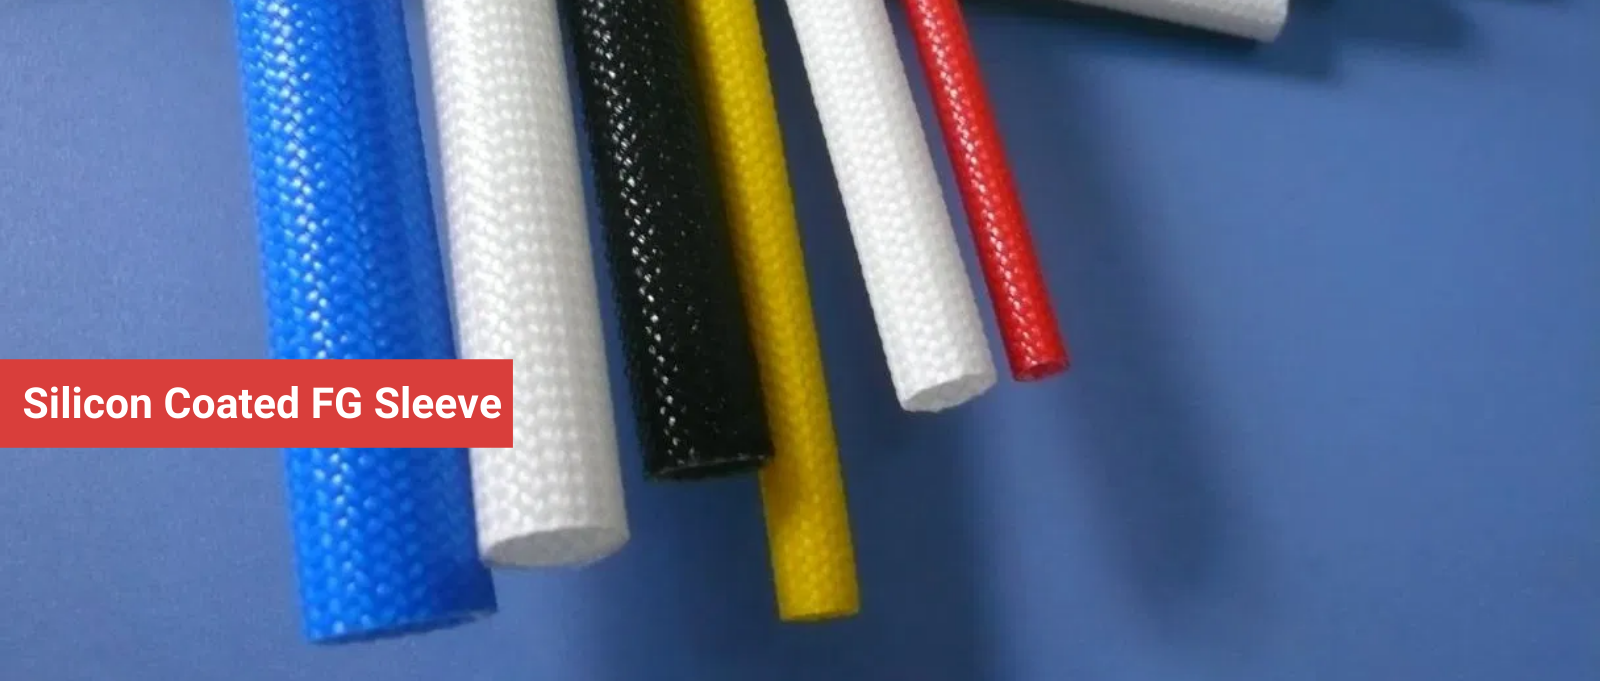 Manufacturers of Silicon Coated FG Sleeve in Mumbai